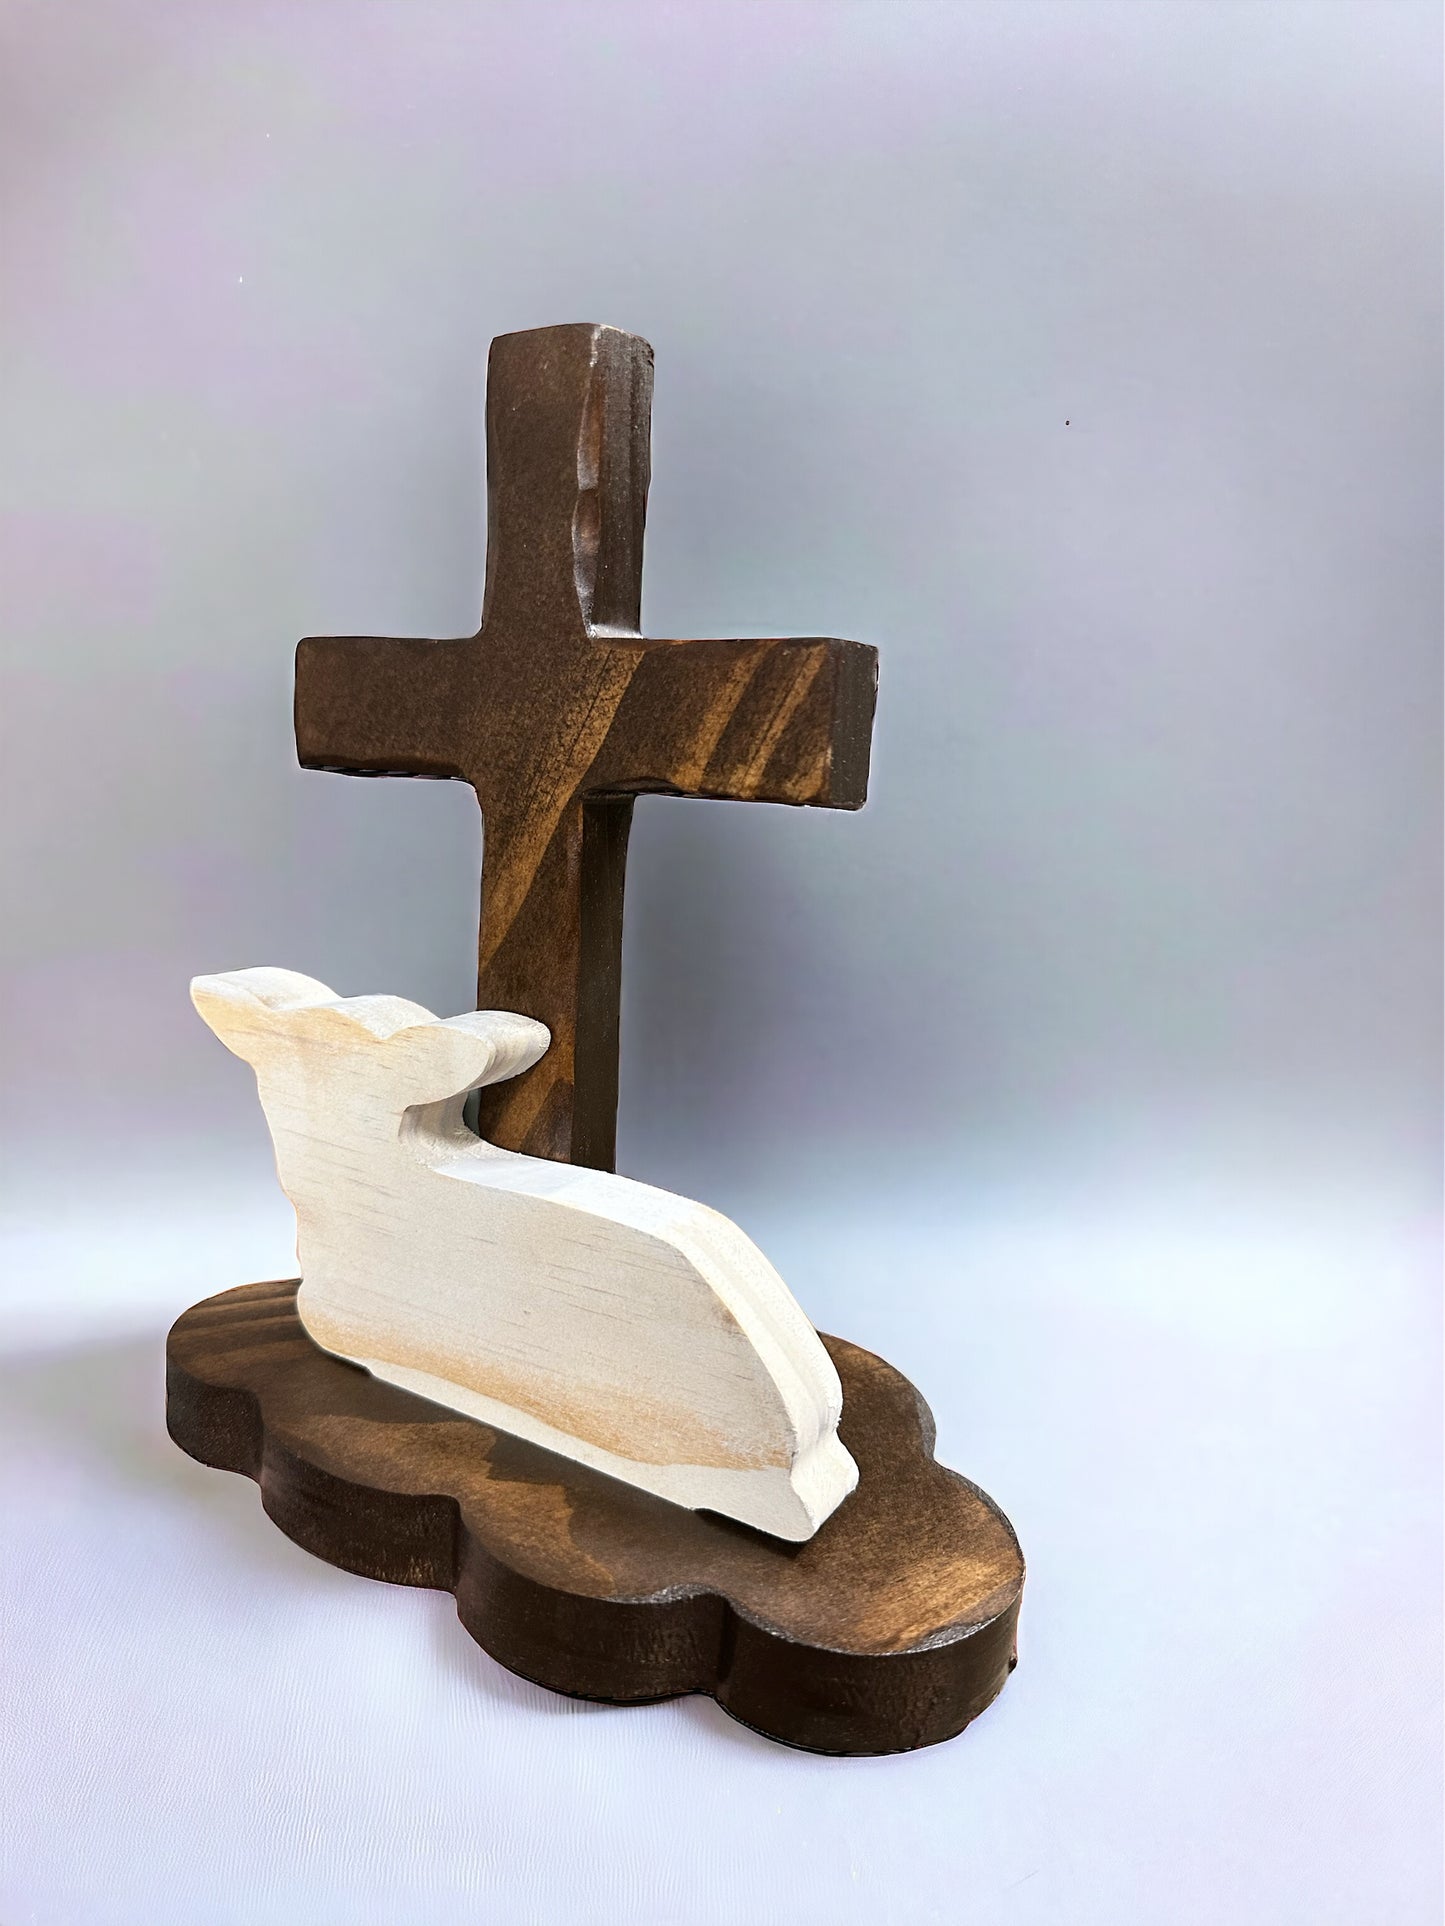 Cross and Lamb Wooden Easter Countertop Art, Easter decor Spring decor for home, shelf, table decor, Christians Easter Decor, Lamb & Cross